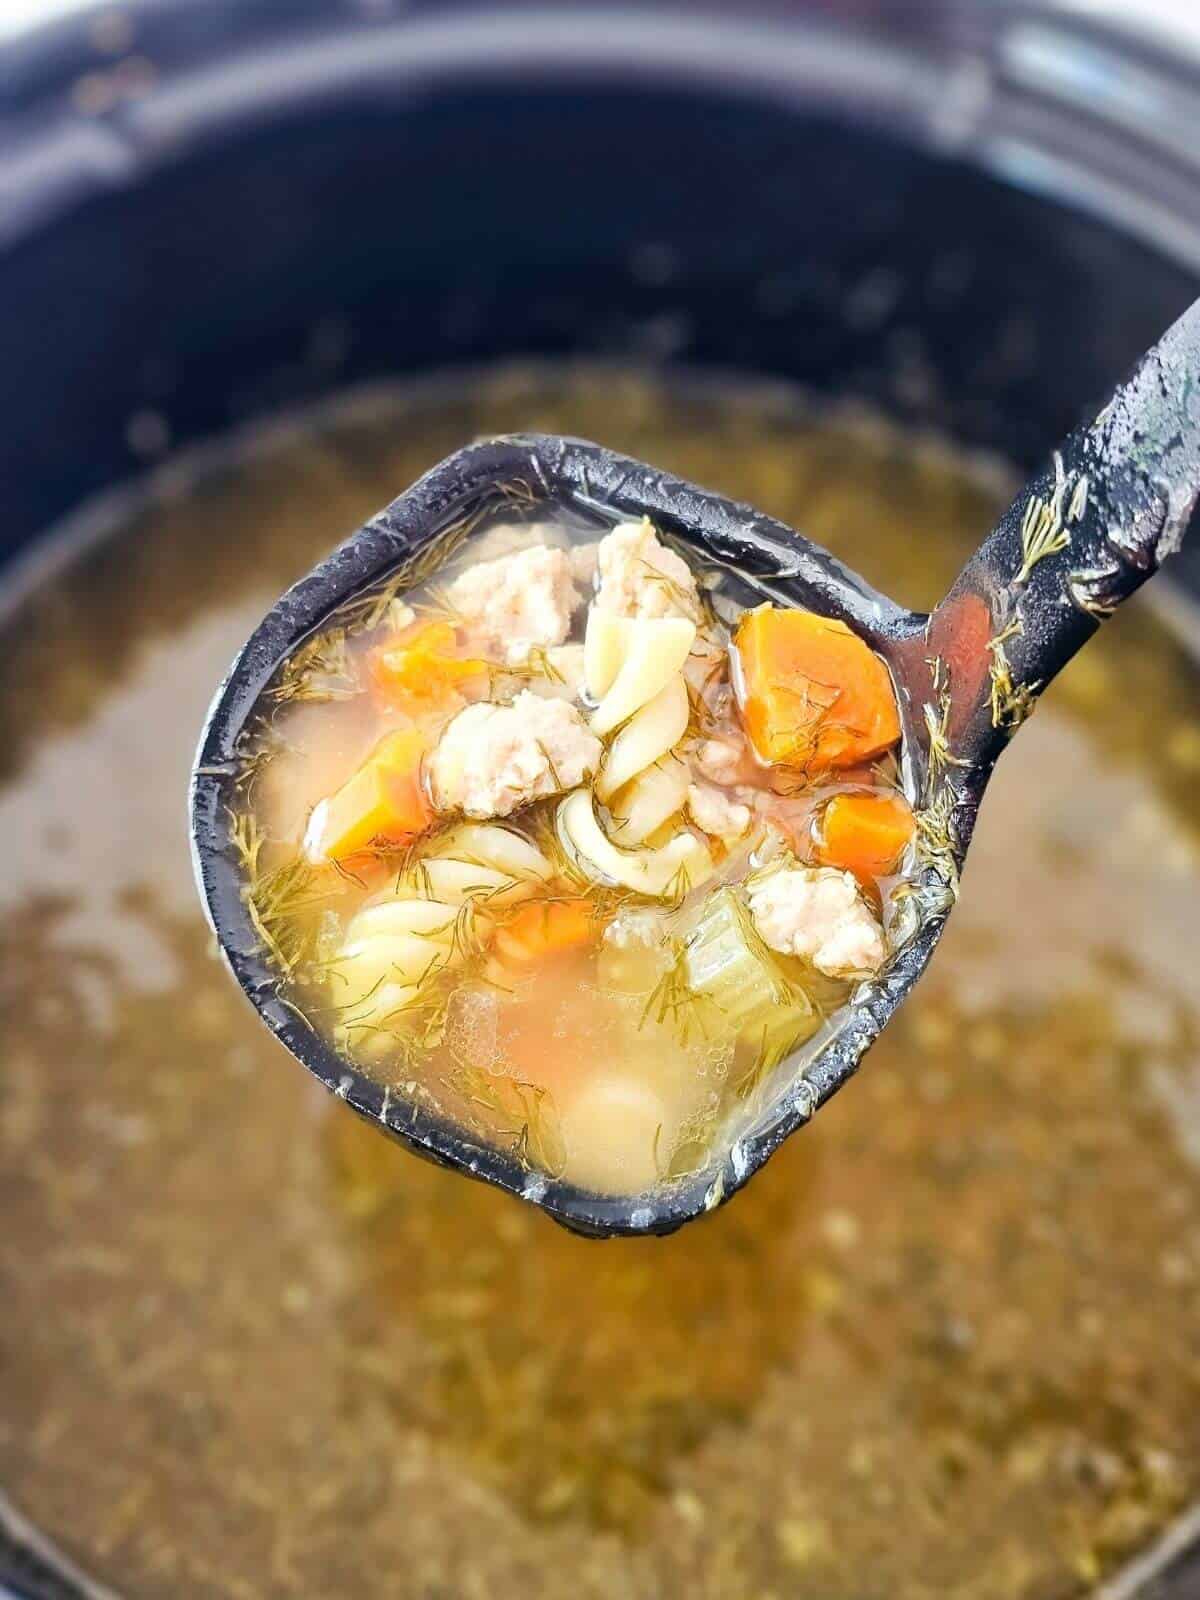 A ladle of soup being taken out of a slow cooker filled with ground chicken soup.